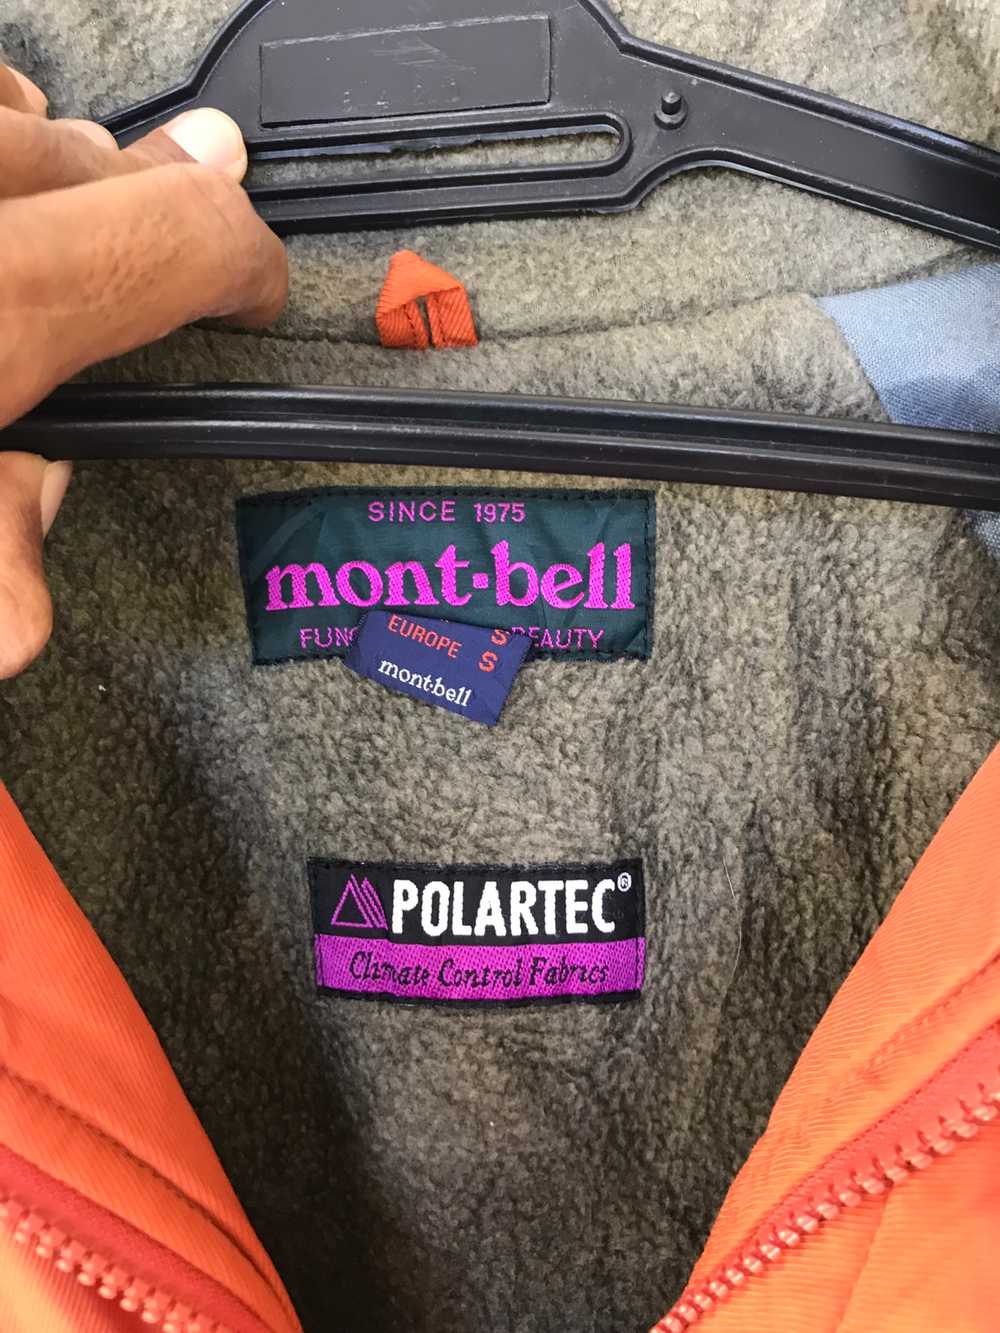 Montbell - Montbell polartec jacket - image 6